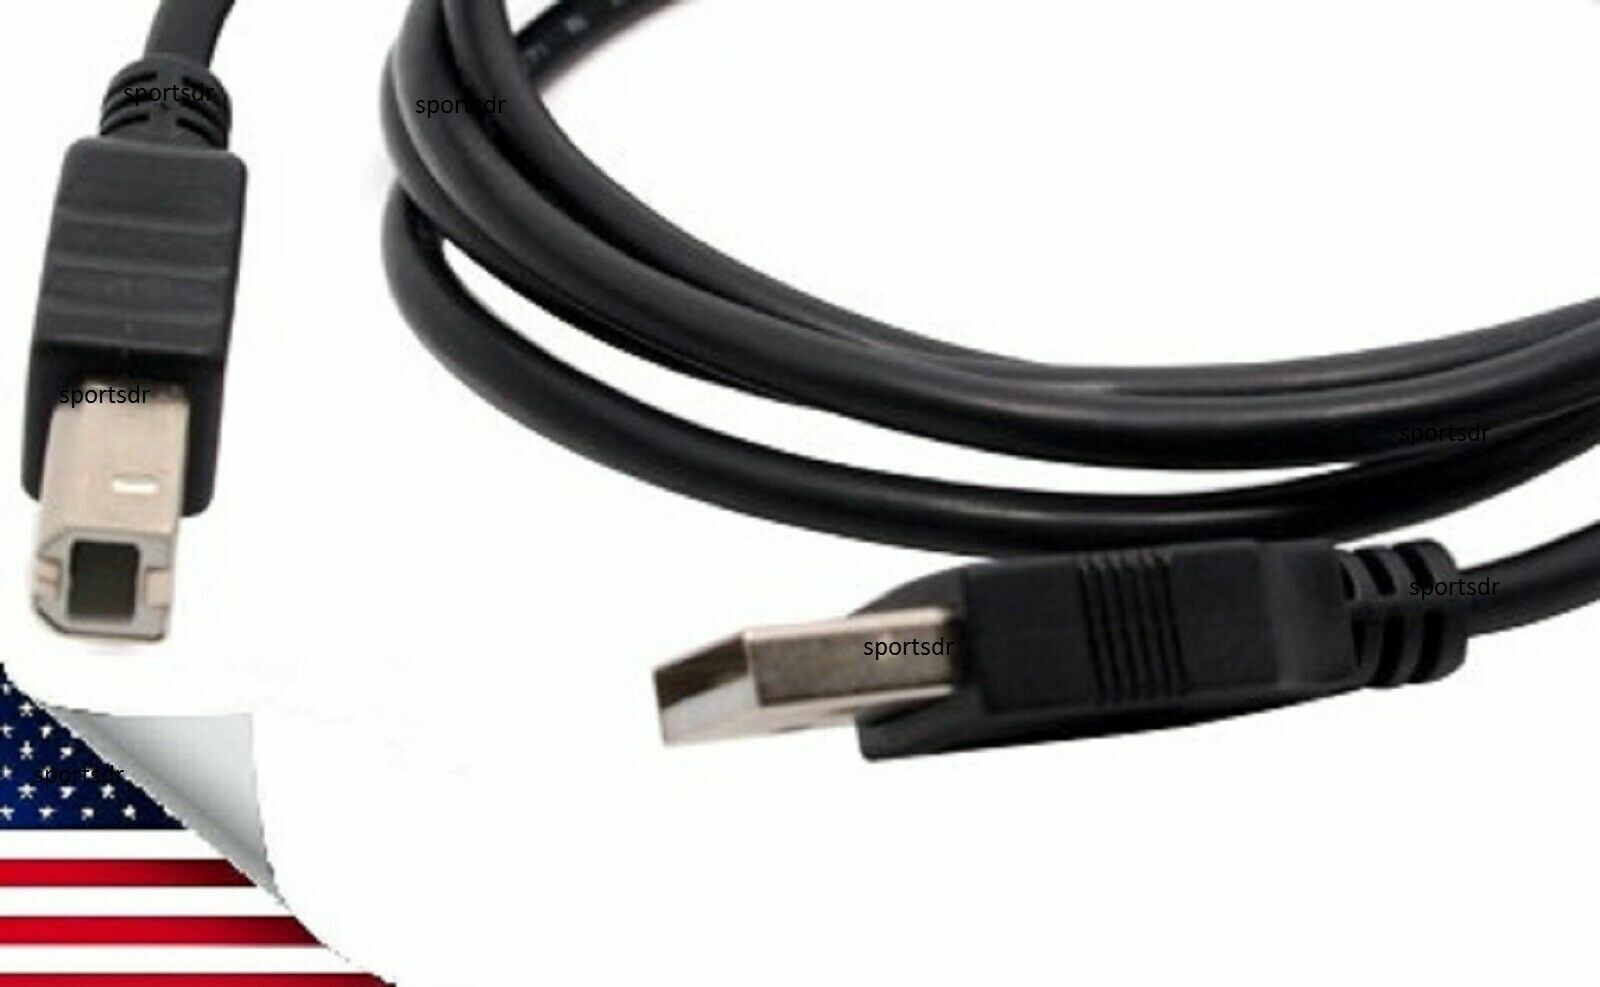 USB Cord Cable Plug for Novation Control Launchpad Pro 64-Drum Pad Controller